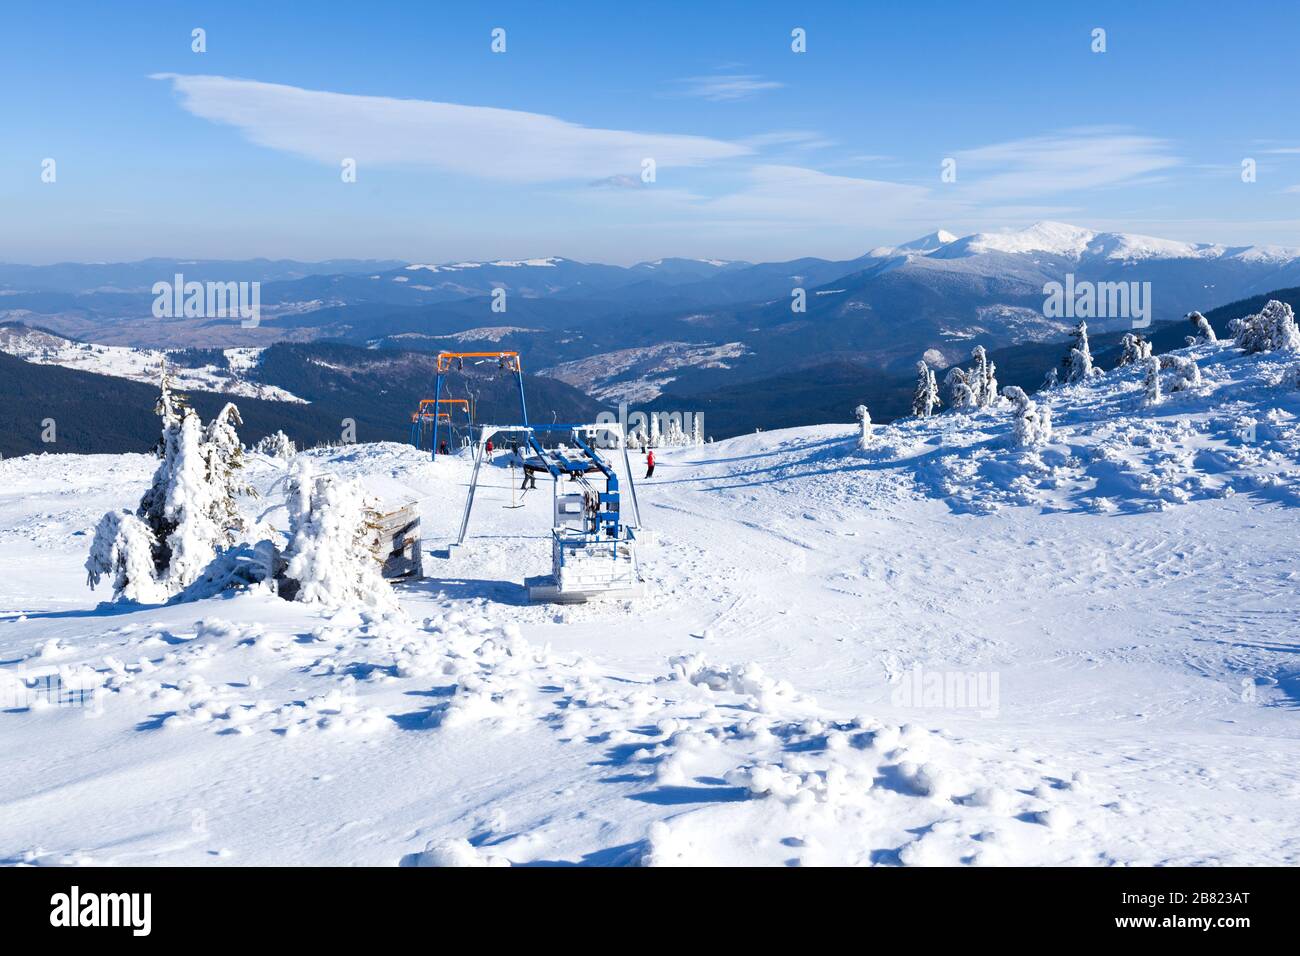 https://c8.alamy.com/comp/2B823AT/empty-ski-lift-covered-with-frost-and-snow-with-mountains-at-background-on-sunny-clear-winter-day-with-blue-sky-travelling-and-winter-activities-conc-2B823AT.jpg